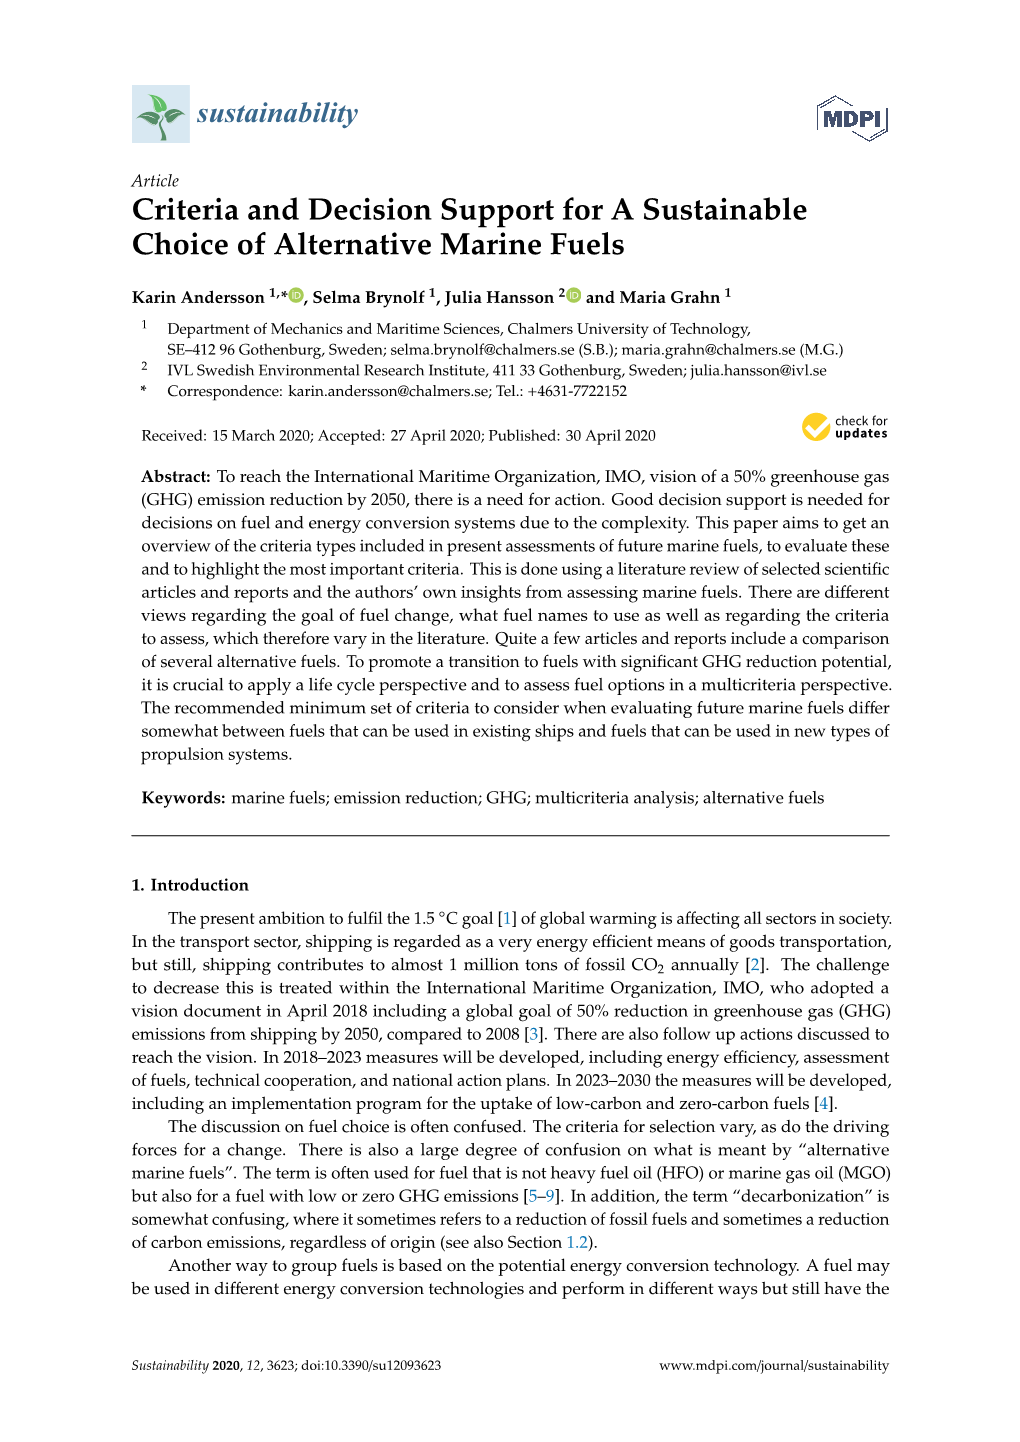 Criteria and Decision Support for a Sustainable Choice of Alternative Marine Fuels